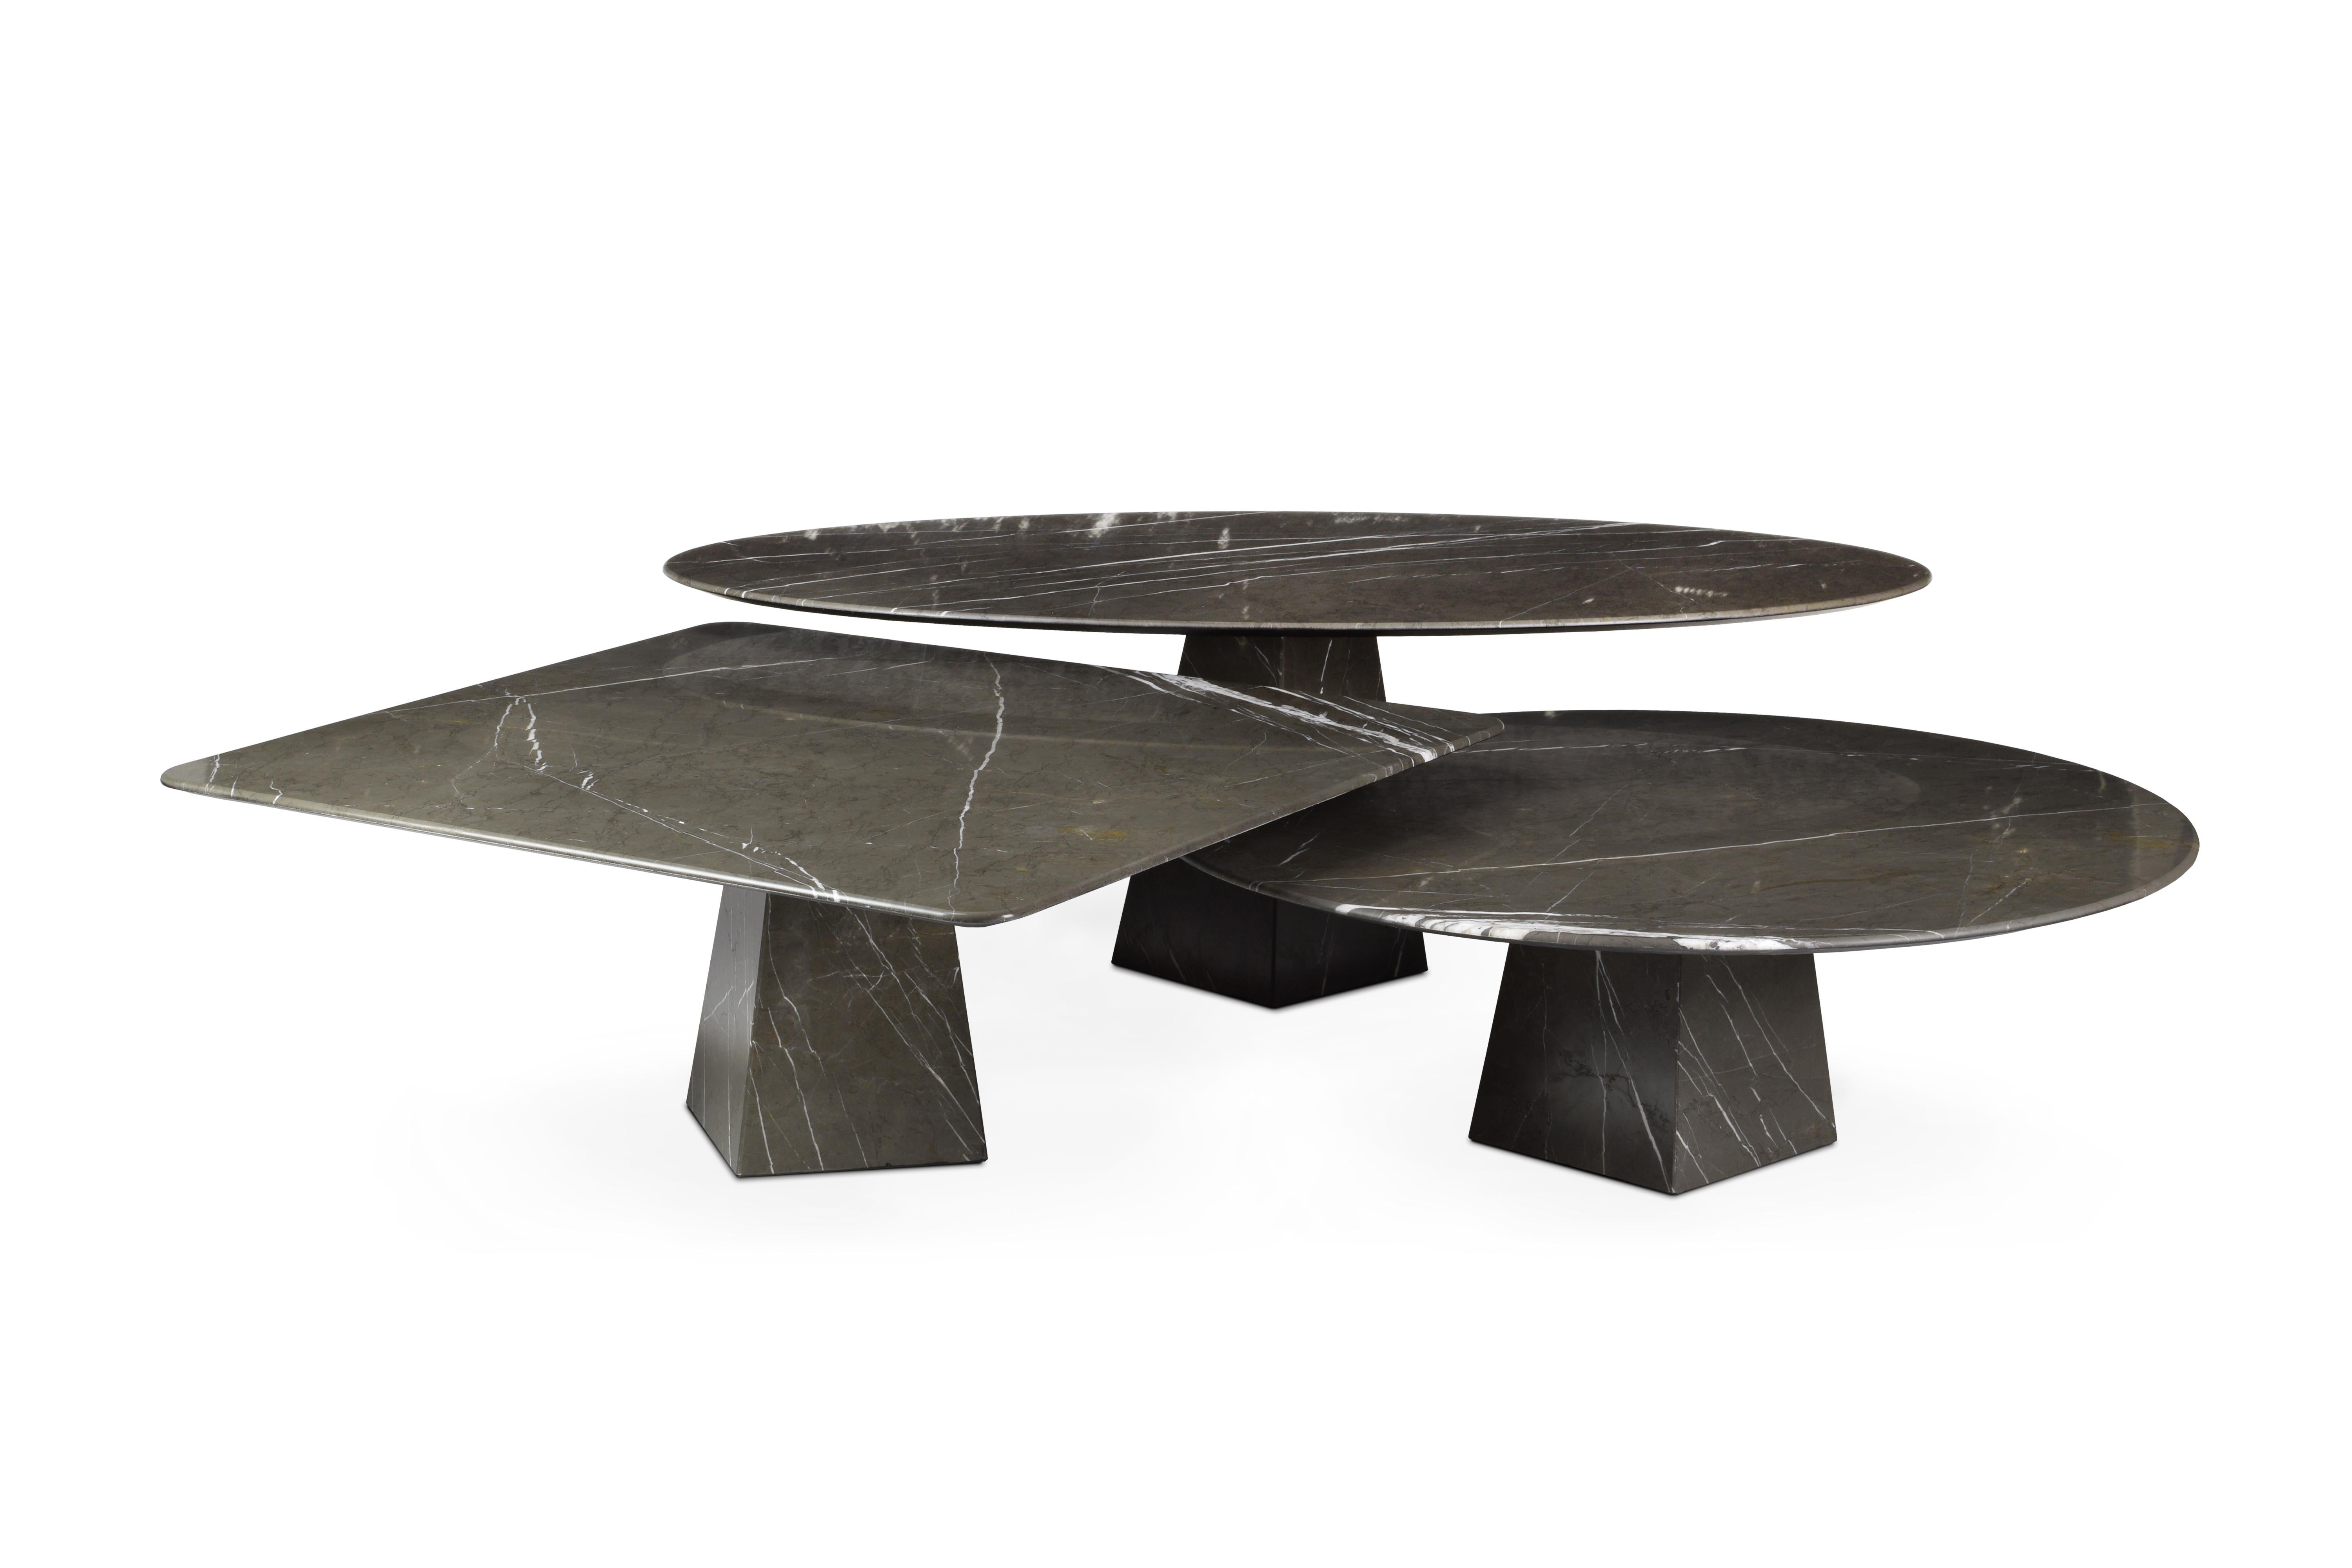 Ultra thin grey graphite matte marble squared coffee table
Inspired by the feeling of weightlessness and its connection to the space, crafted entirely in laminated stone.
This advanced technique allows us to get an ultra-thin and high resistant